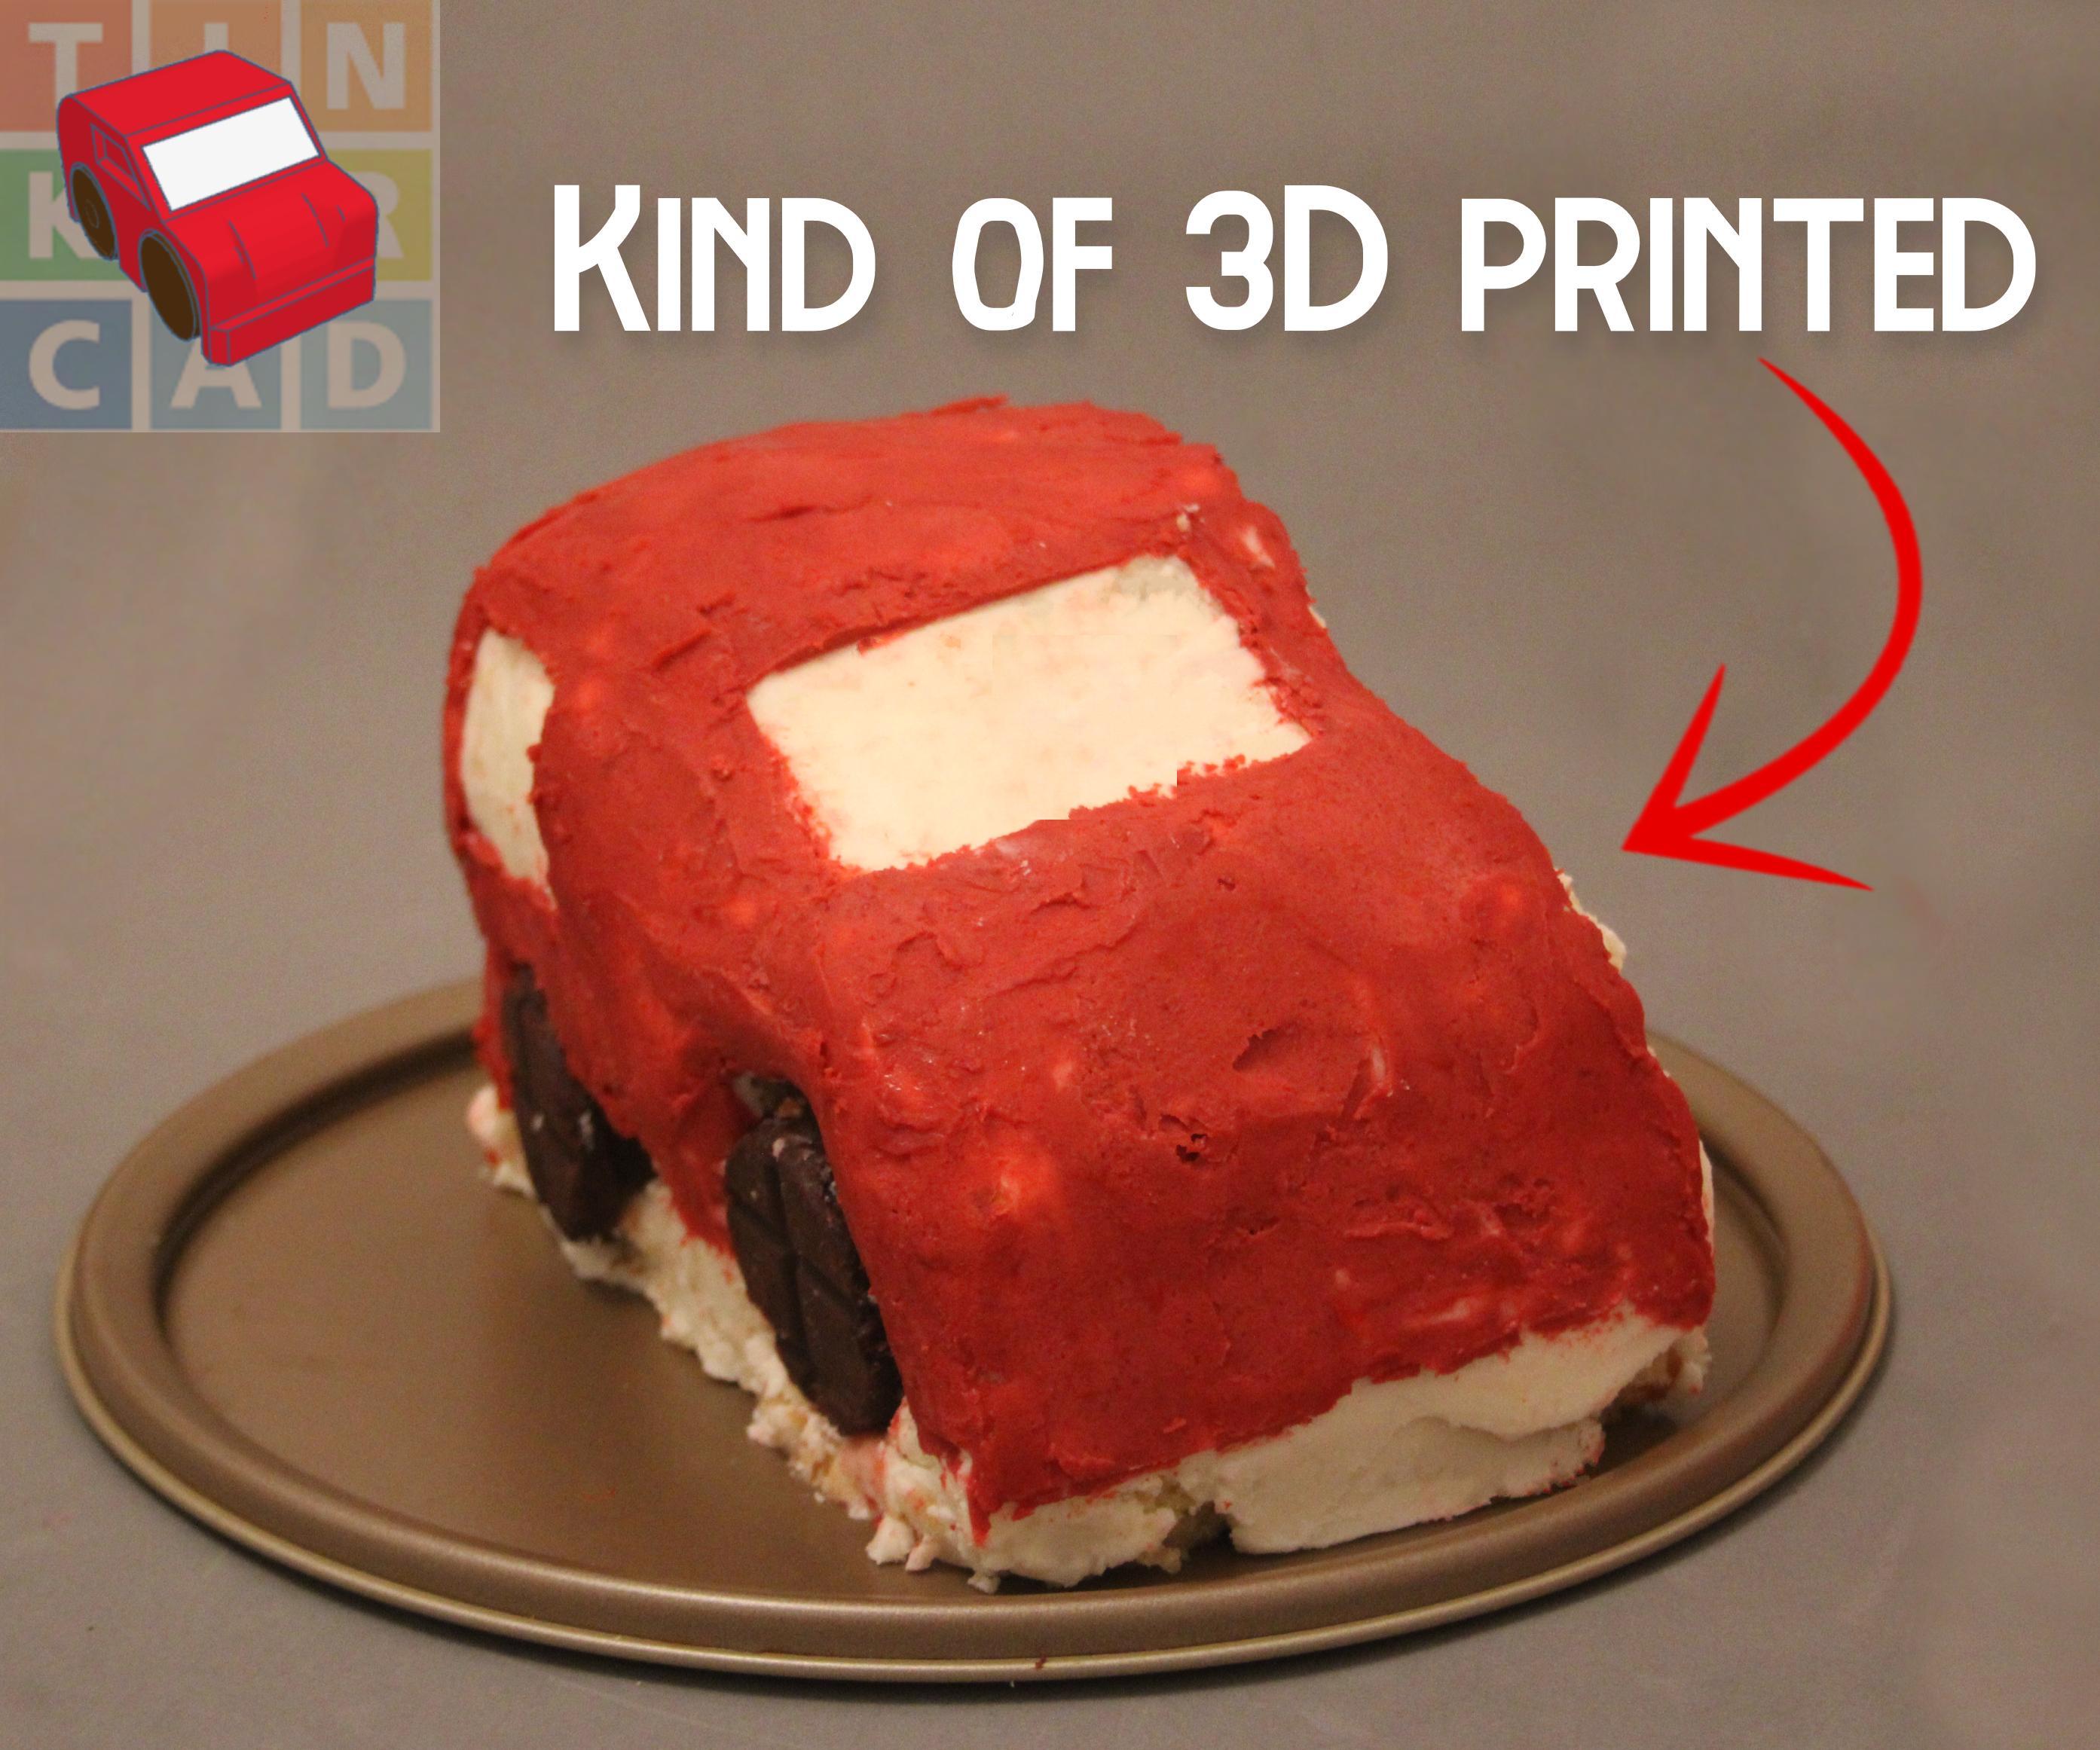 Anyone Can 3D Print Shaped Cakes - Teach 3D Printing (Without a 3D Printer)